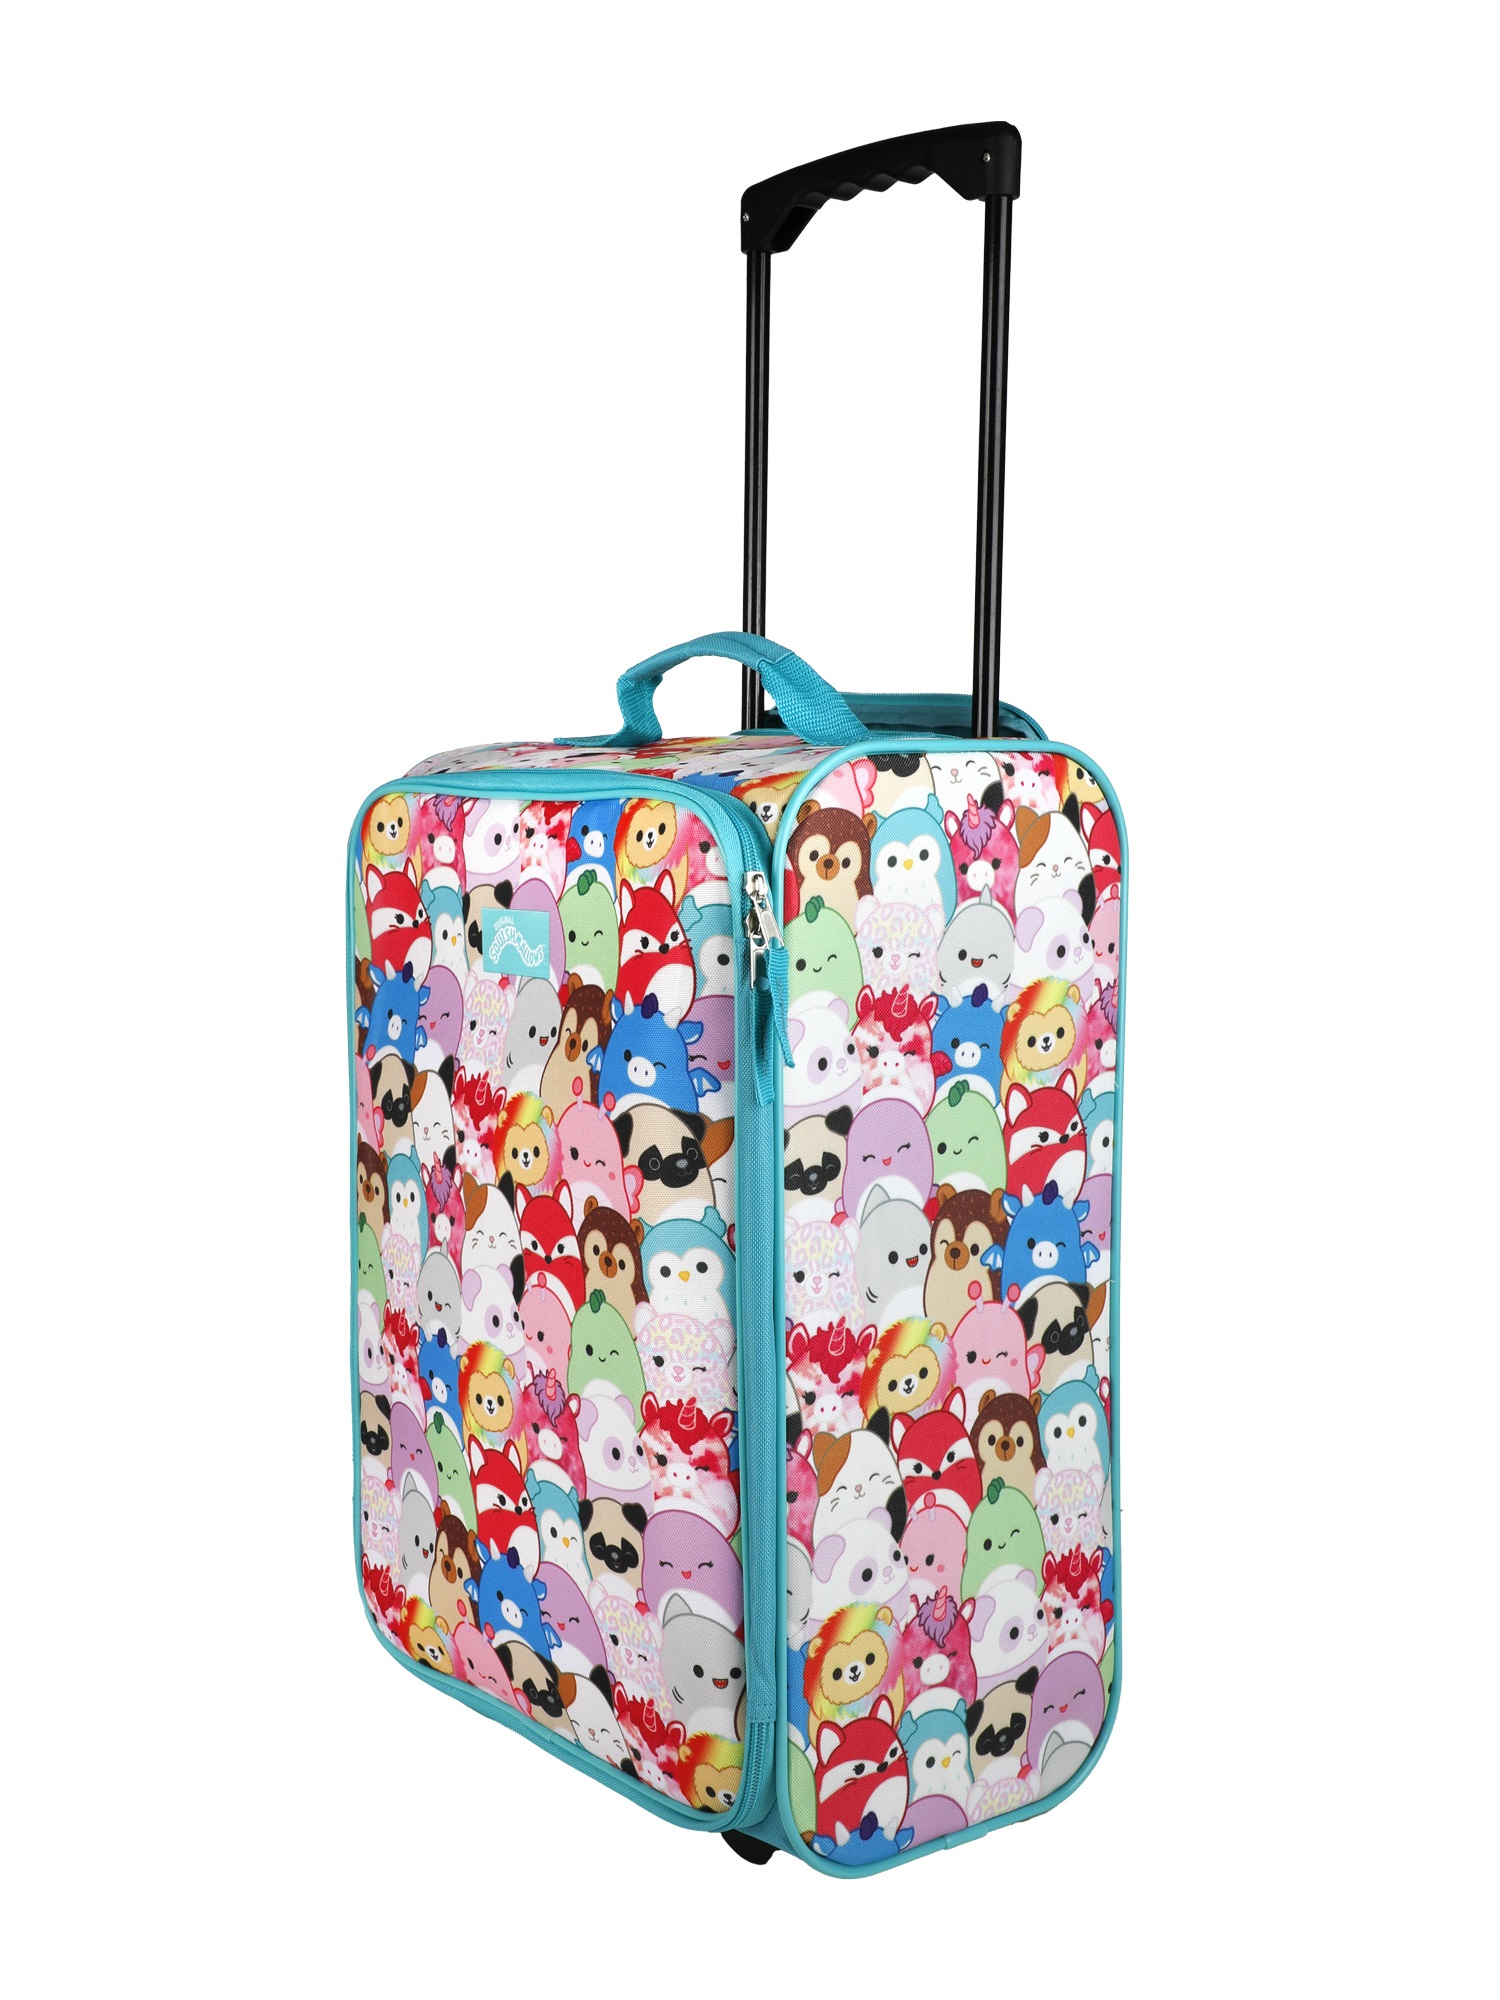 Squishmallows Cameron Cat 2pc  Travel Set with 18" Luggage and 10" Plush Backpack - image 2 of 9